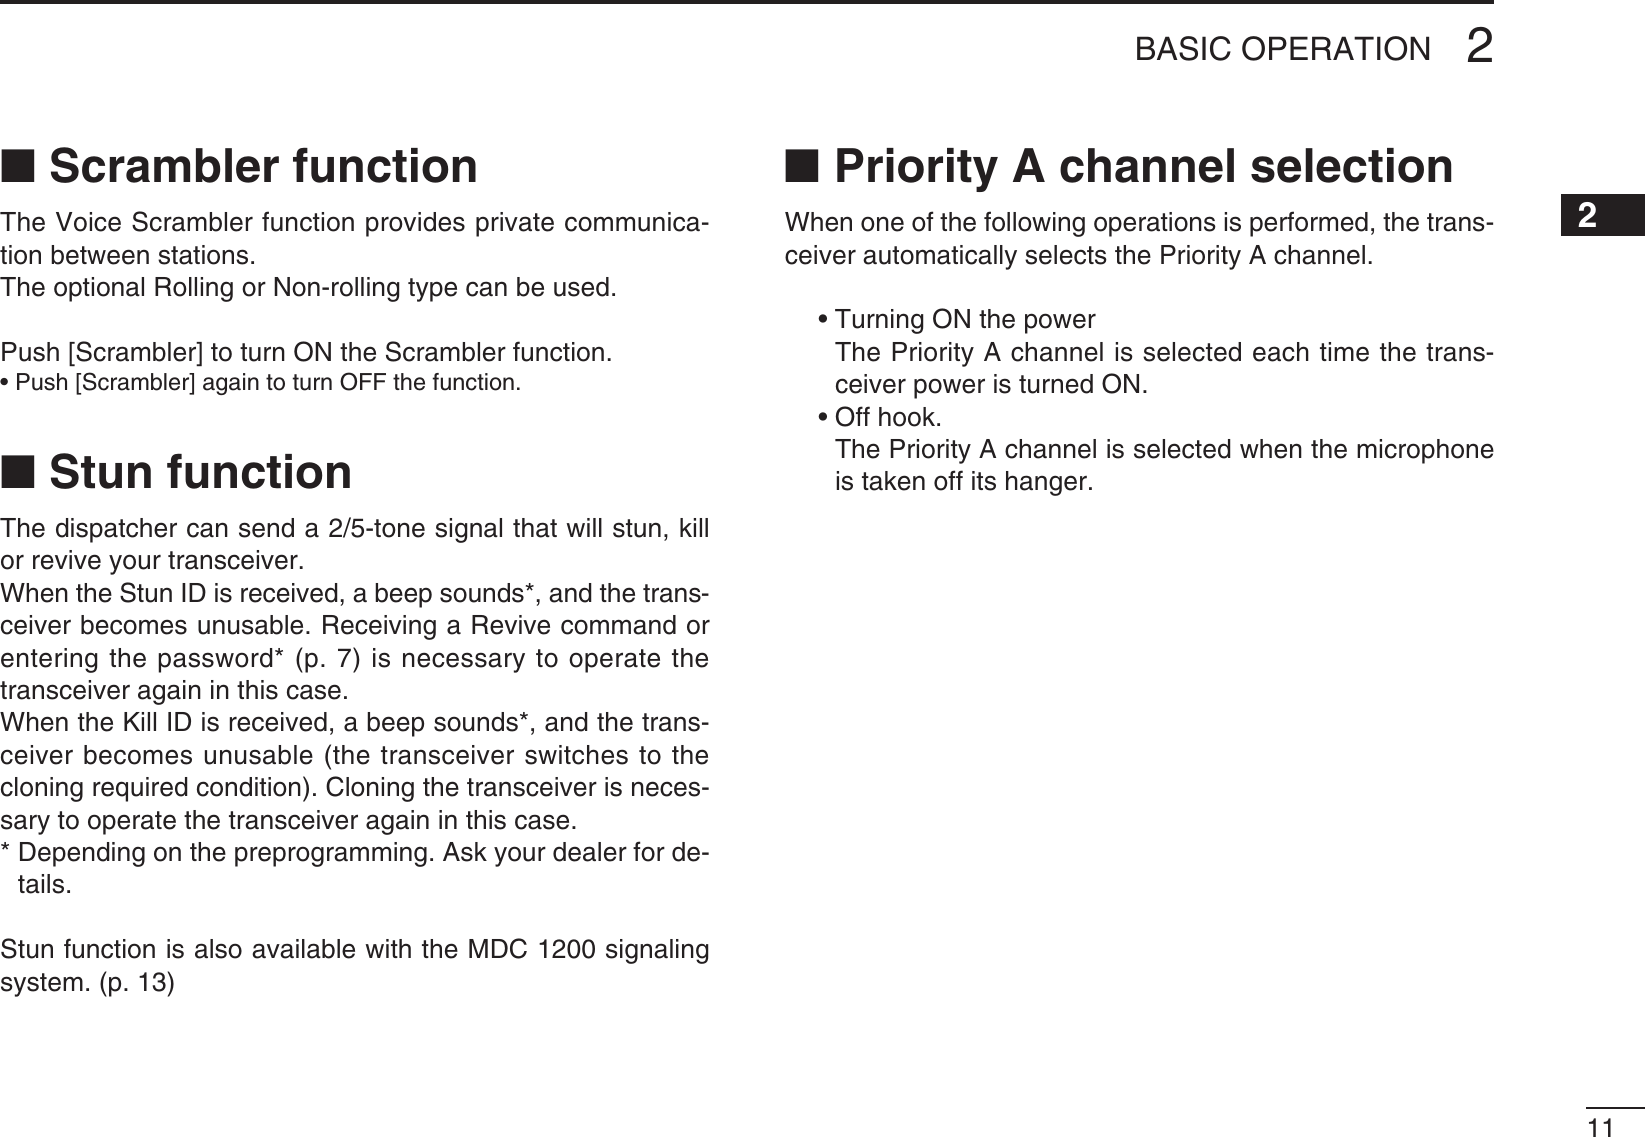 112BASIC OPERATION2N Scrambler functionThe Voice Scrambler function provides private communica-tion between stations.The optional Rolling or Non-rolling type can be used.Push [Scrambler] to turn ON the Scrambler function.s0USH;3CRAMBLER=AGAINTOTURN/&amp;&amp;THEFUNCTIONN Stun function4HEDISPATCHERCANSENDATONESIGNALTHATWILLSTUNKILLor revive your transceiver.When the Stun ID is received, a beep sounds*, and the trans-ceiver becomes unusable. Receiving a Revive command or entering the password* (p. 7) is necessary to operate the transceiver again in this case.When the Kill ID is received, a beep sounds*, and the trans-ceiver becomes unusable (the transceiver switches to the cloning required condition). Cloning the transceiver is neces-sary to operate the transceiver again in this case.*  Depending on the preprogramming. Ask your dealer for de-tails.Stun function is also available with the MDC 1200 signaling system. (p. 13)N Priority A channel selectionWhen one of the following operations is performed, the trans-ceiver automatically selects the Priority A channel. s4URNING/.THEPOWER   The Priority A channel is selected each time the trans-ceiver power is turned ON. s/FFHOOK   The Priority A channel is selected when the microphone is taken off its hanger.